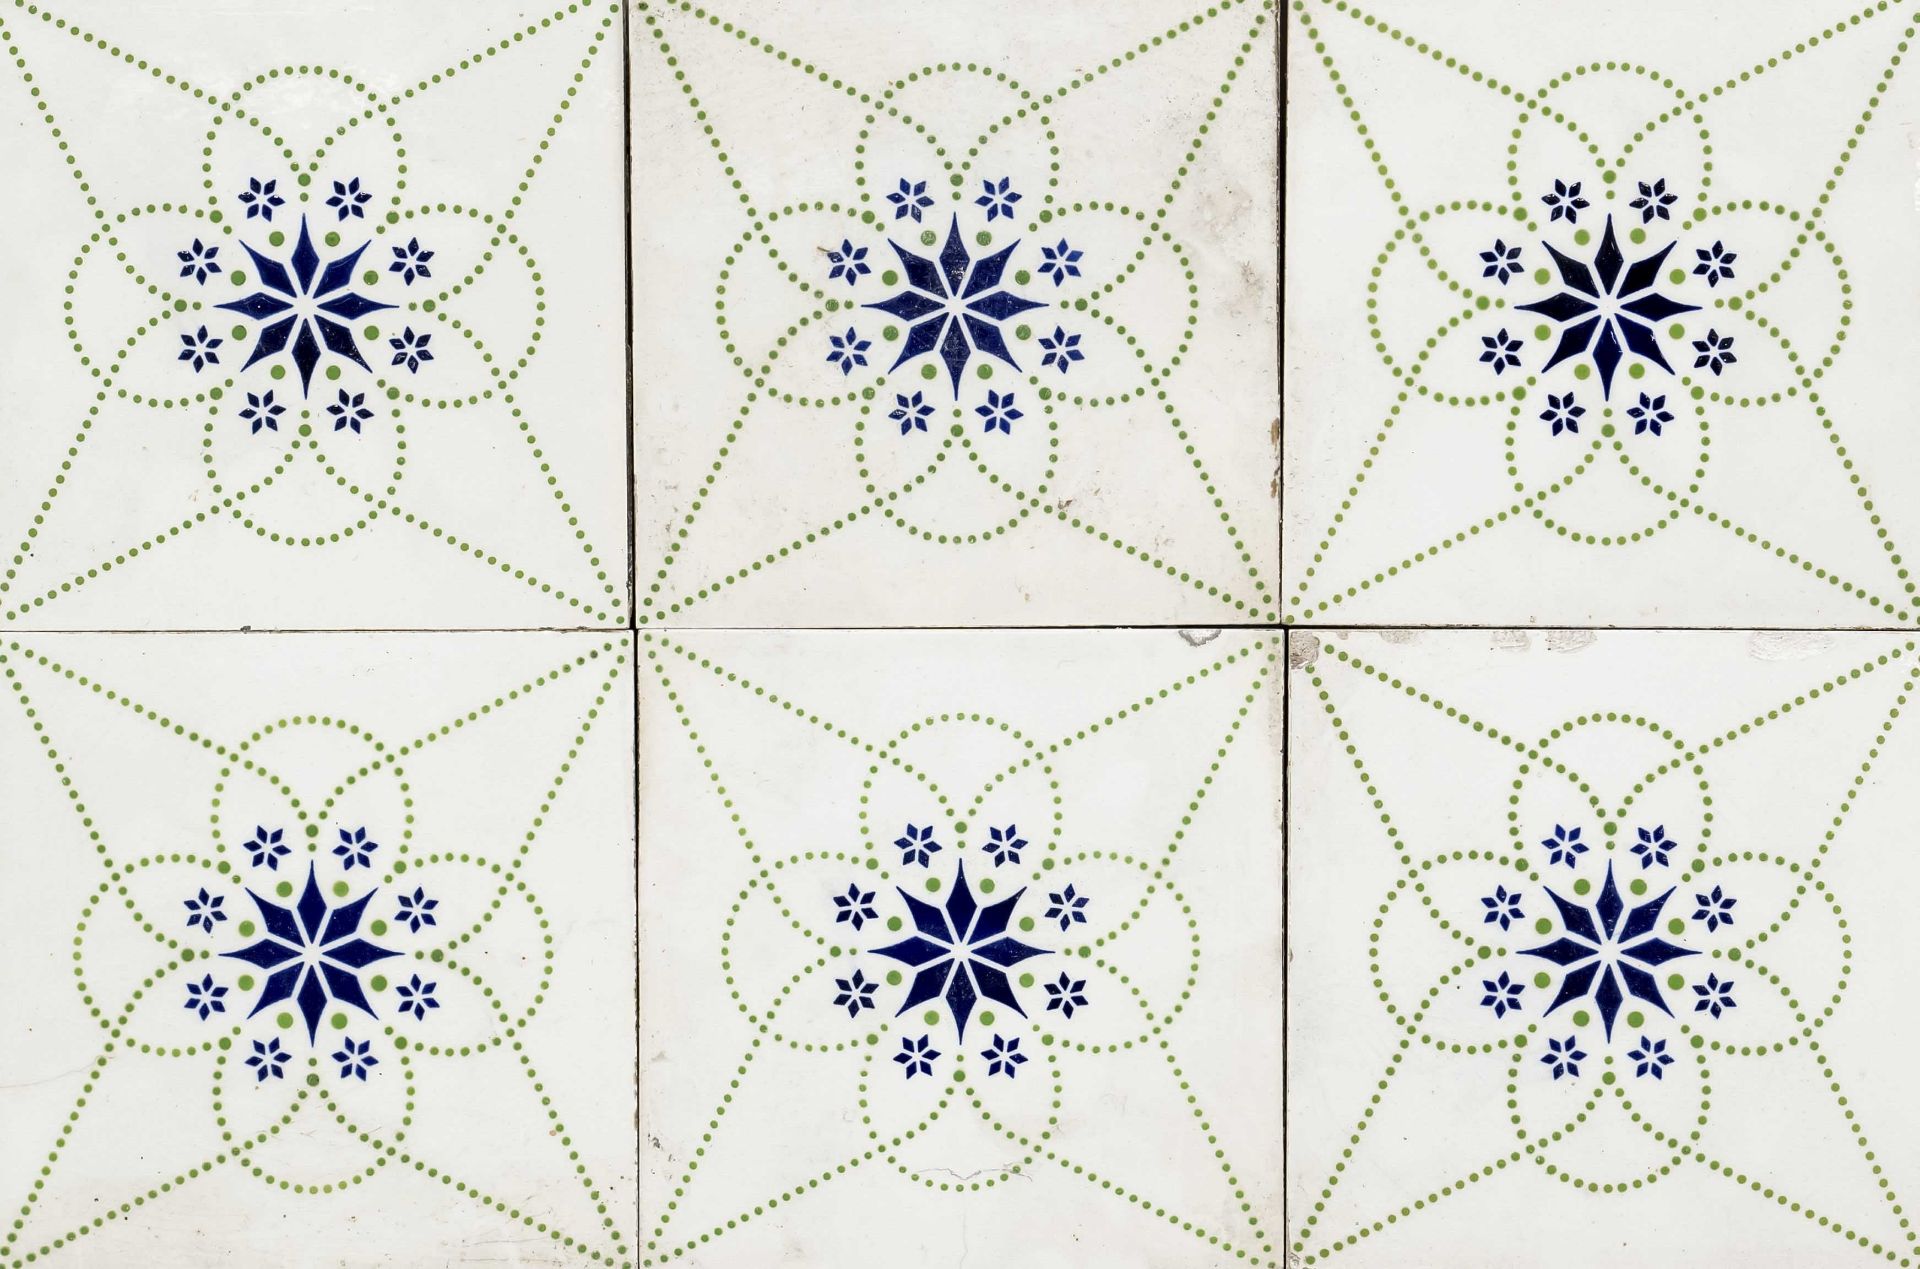 55 Tiles Art deco tiles, 1930s. Stenciled spray decoration in dark green and blue with stylized